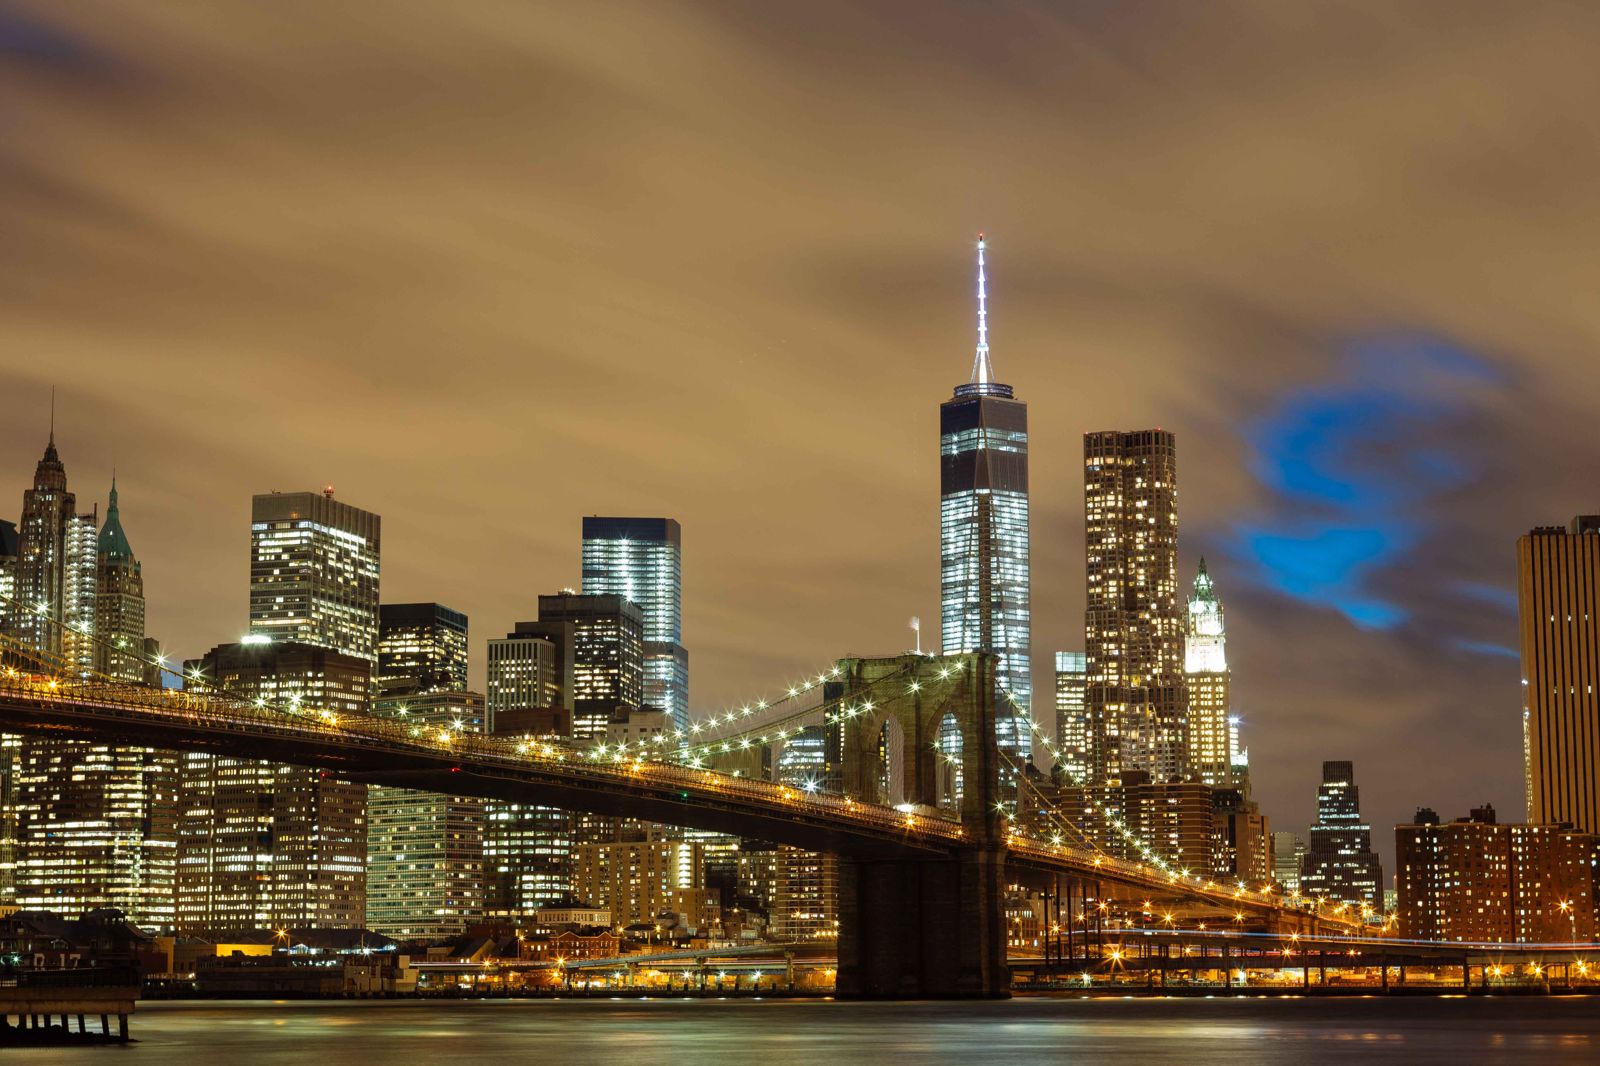 Sky Water City Night Buildings River Lights Urban Cityscape - New York City In The Night - HD Wallpaper 